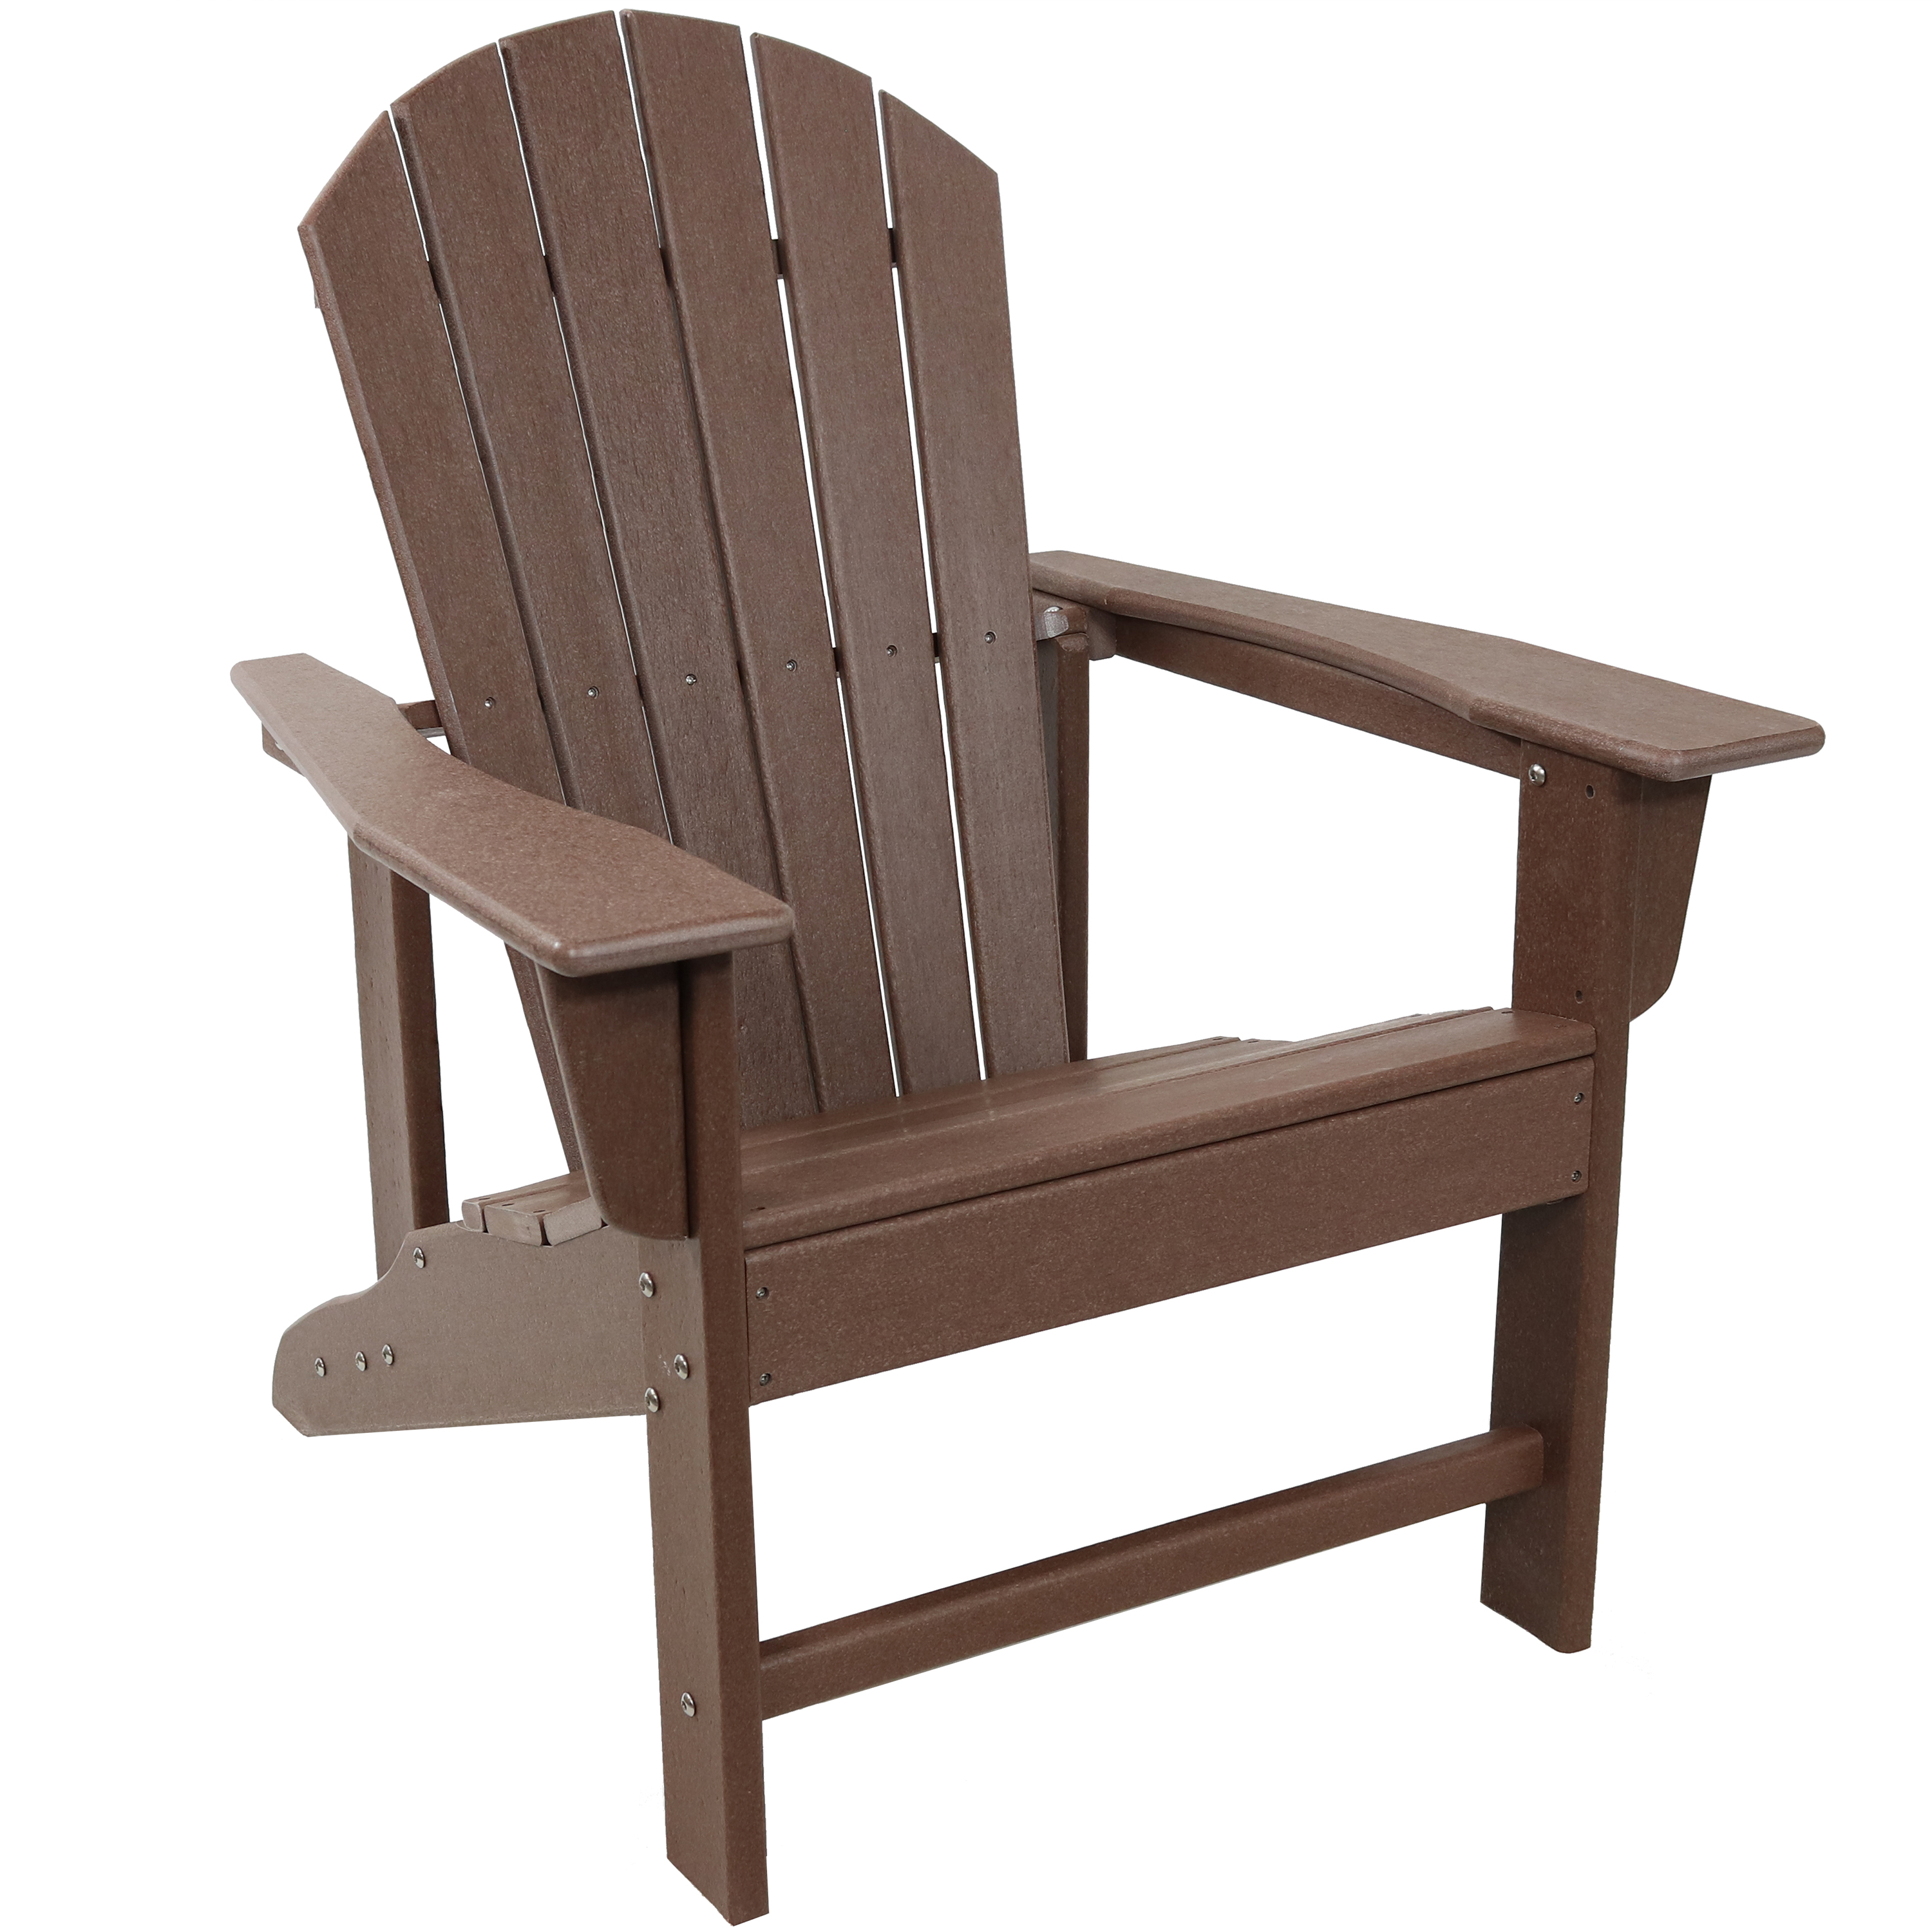 Upright HDPE Raised Outdoor Adirondack Chair - Brown